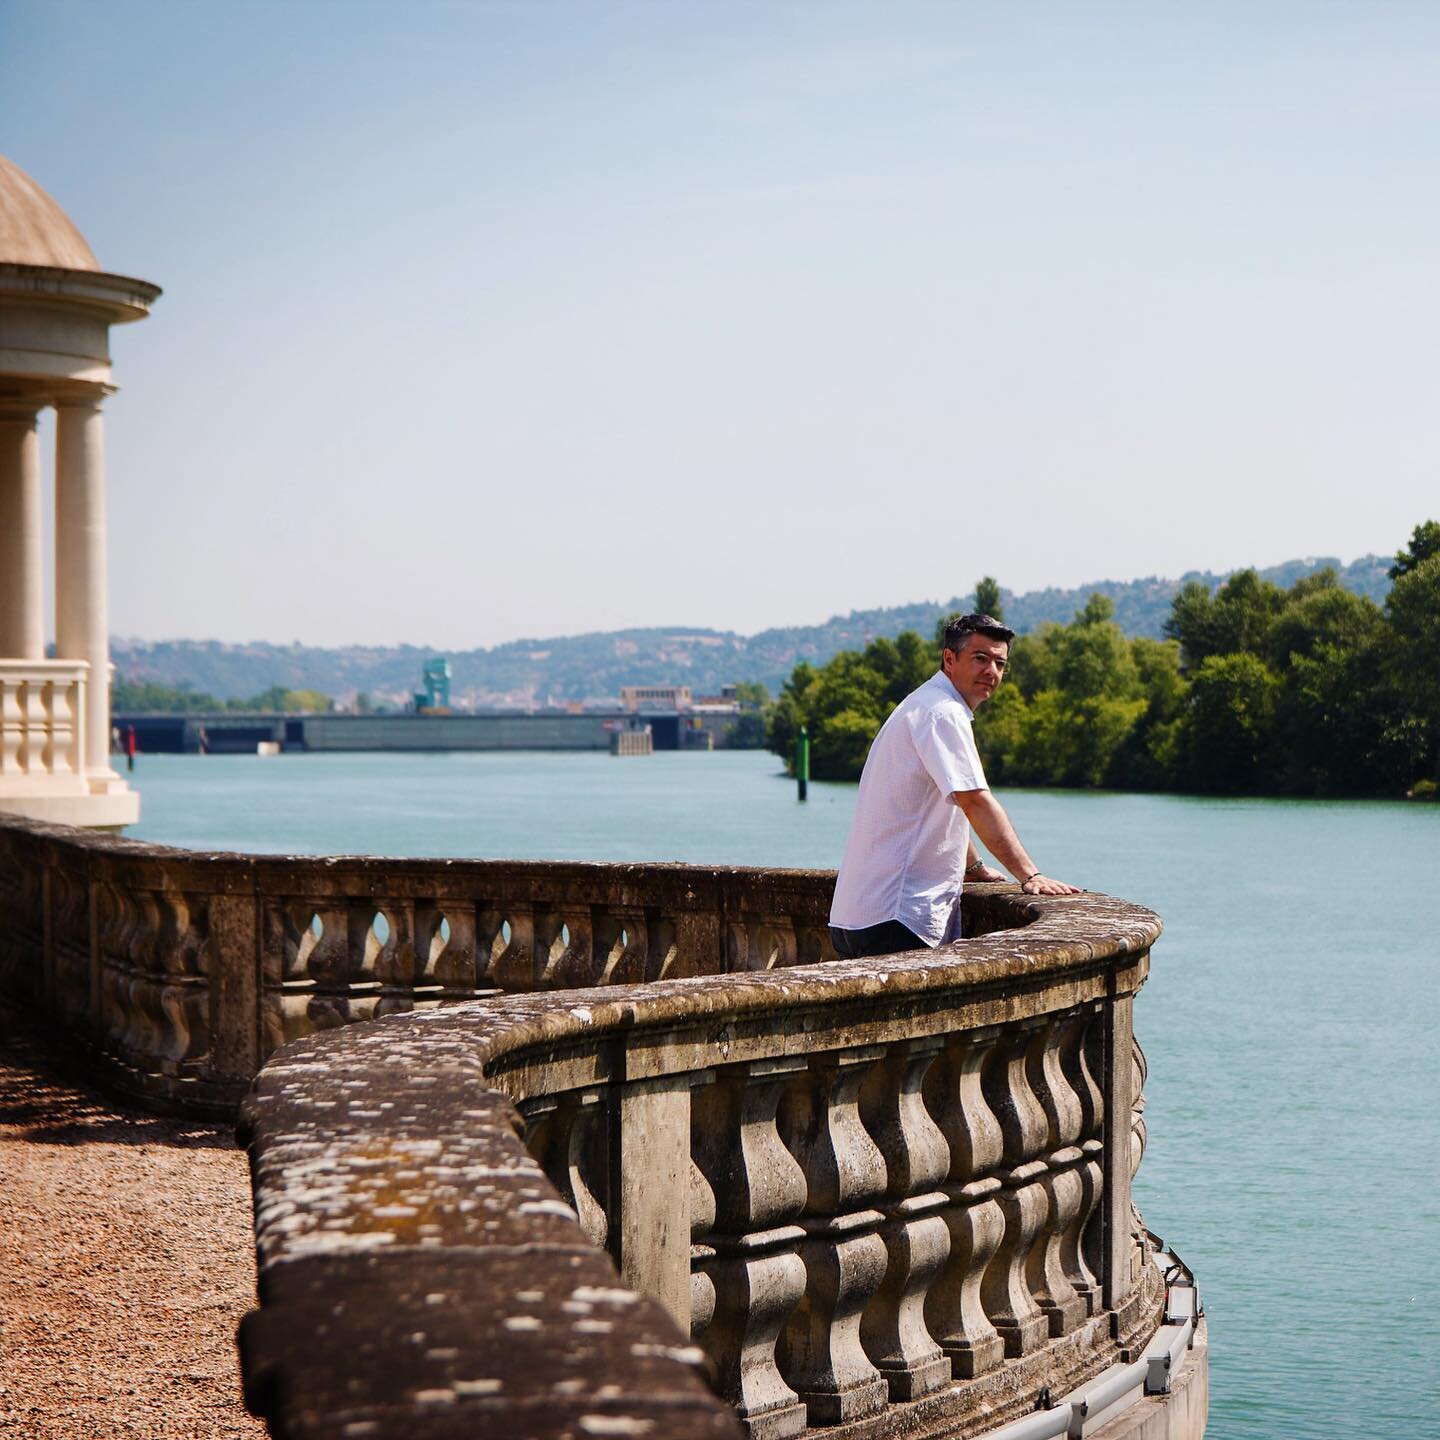 Wine People Portraits 01

I&rsquo;ll be posting a series of pictures I&rsquo;ve taken of wine personalities. First out is Philippe Guigal in C&ocirc;te-R&ocirc;tie, shot at their spectacular estate Chateau d&rsquo;Ampuis by the river Rh&ocirc;ne, and